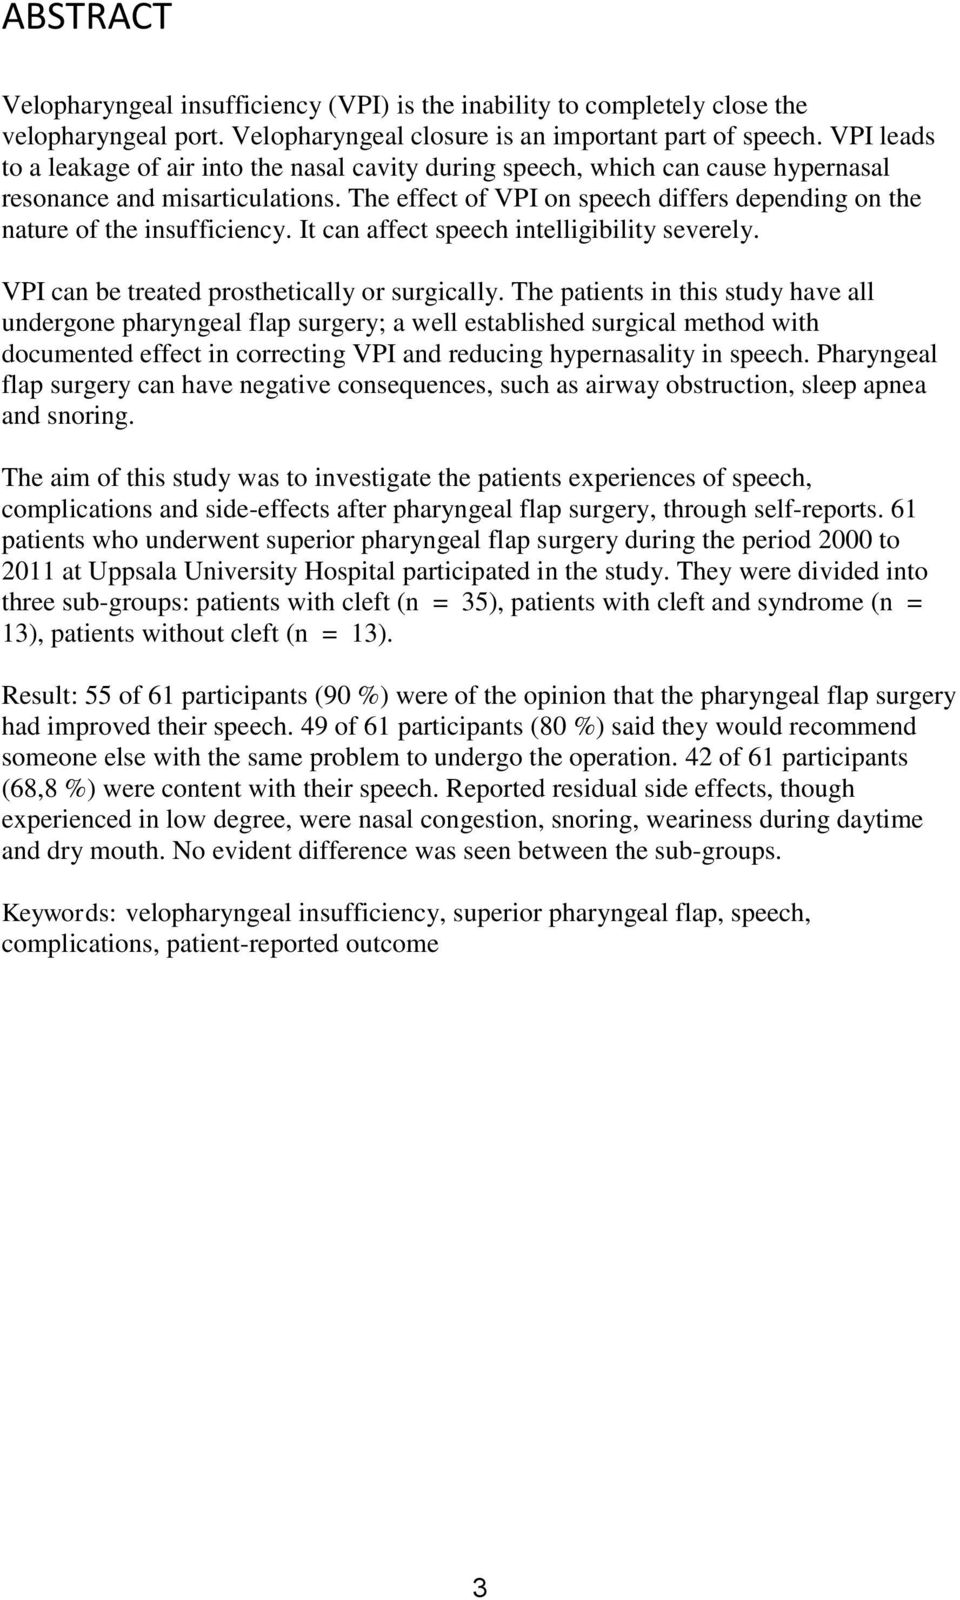 The effect of VPI on speech differs depending on the nature of the insufficiency. It can affect speech intelligibility severely. VPI can be treated prosthetically or surgically.